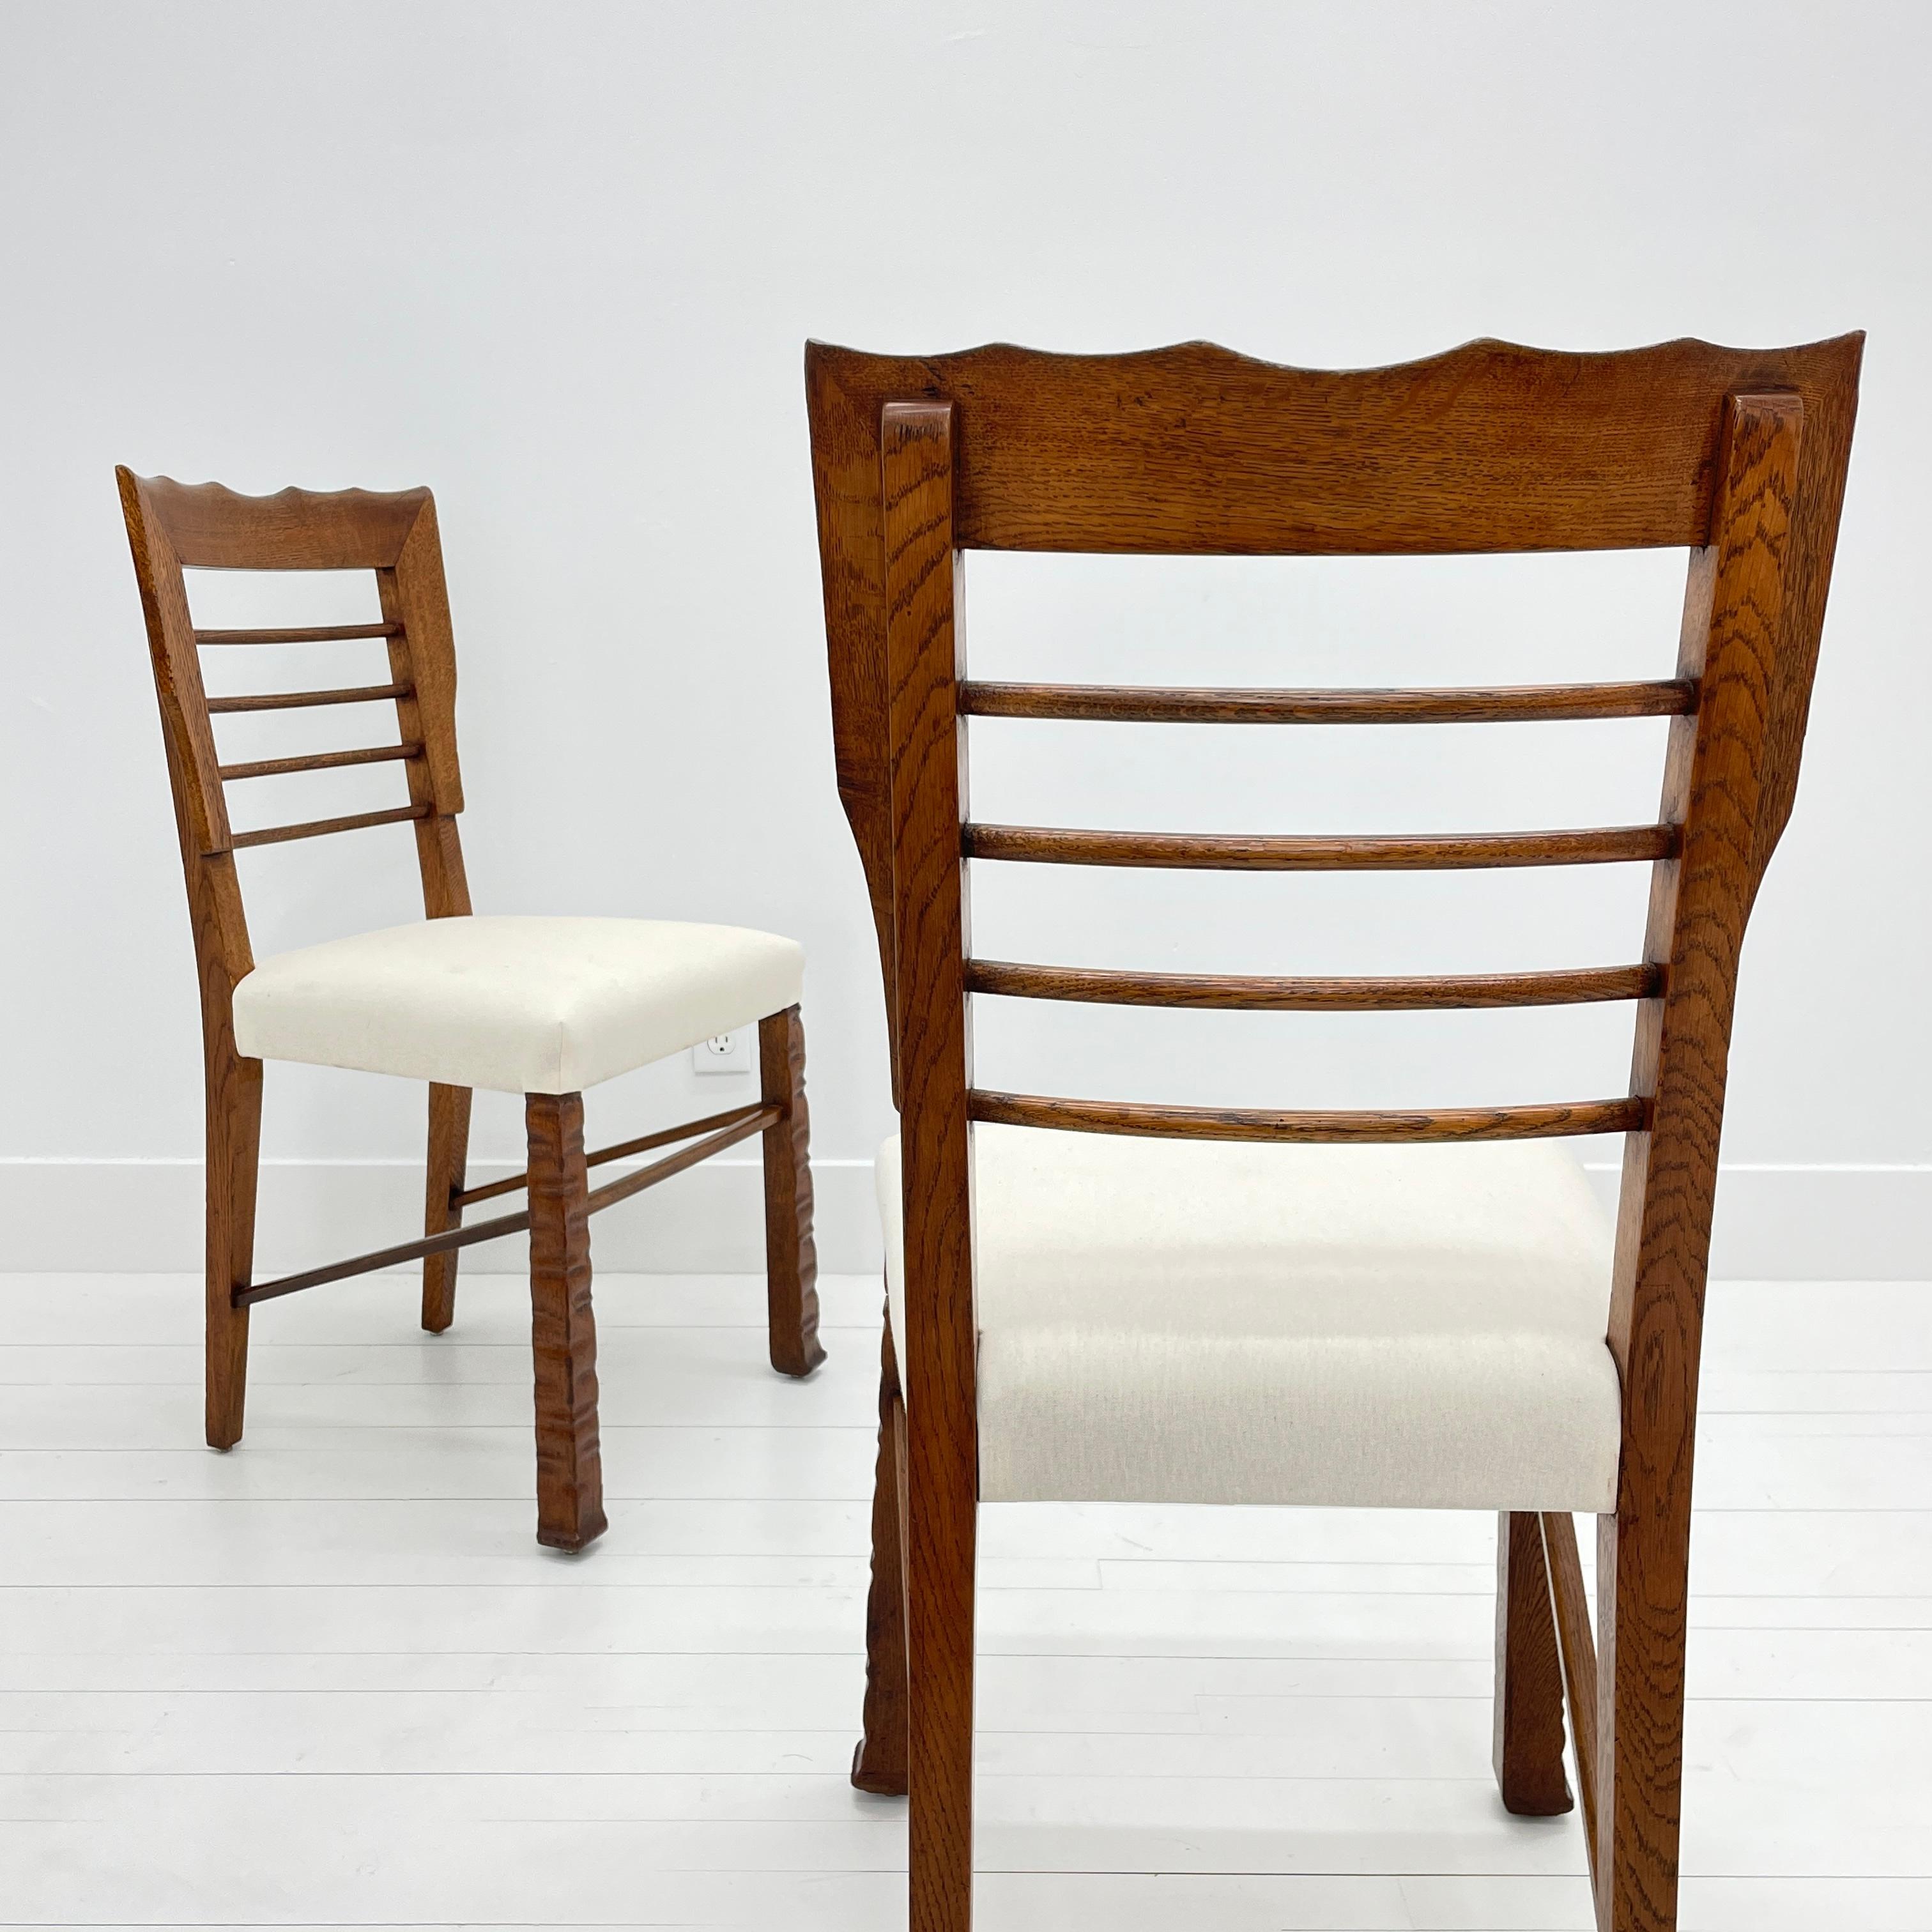 Rustic Scalloped Edge Dining Chairs, Set of 10, Italy, 1940's For Sale 2